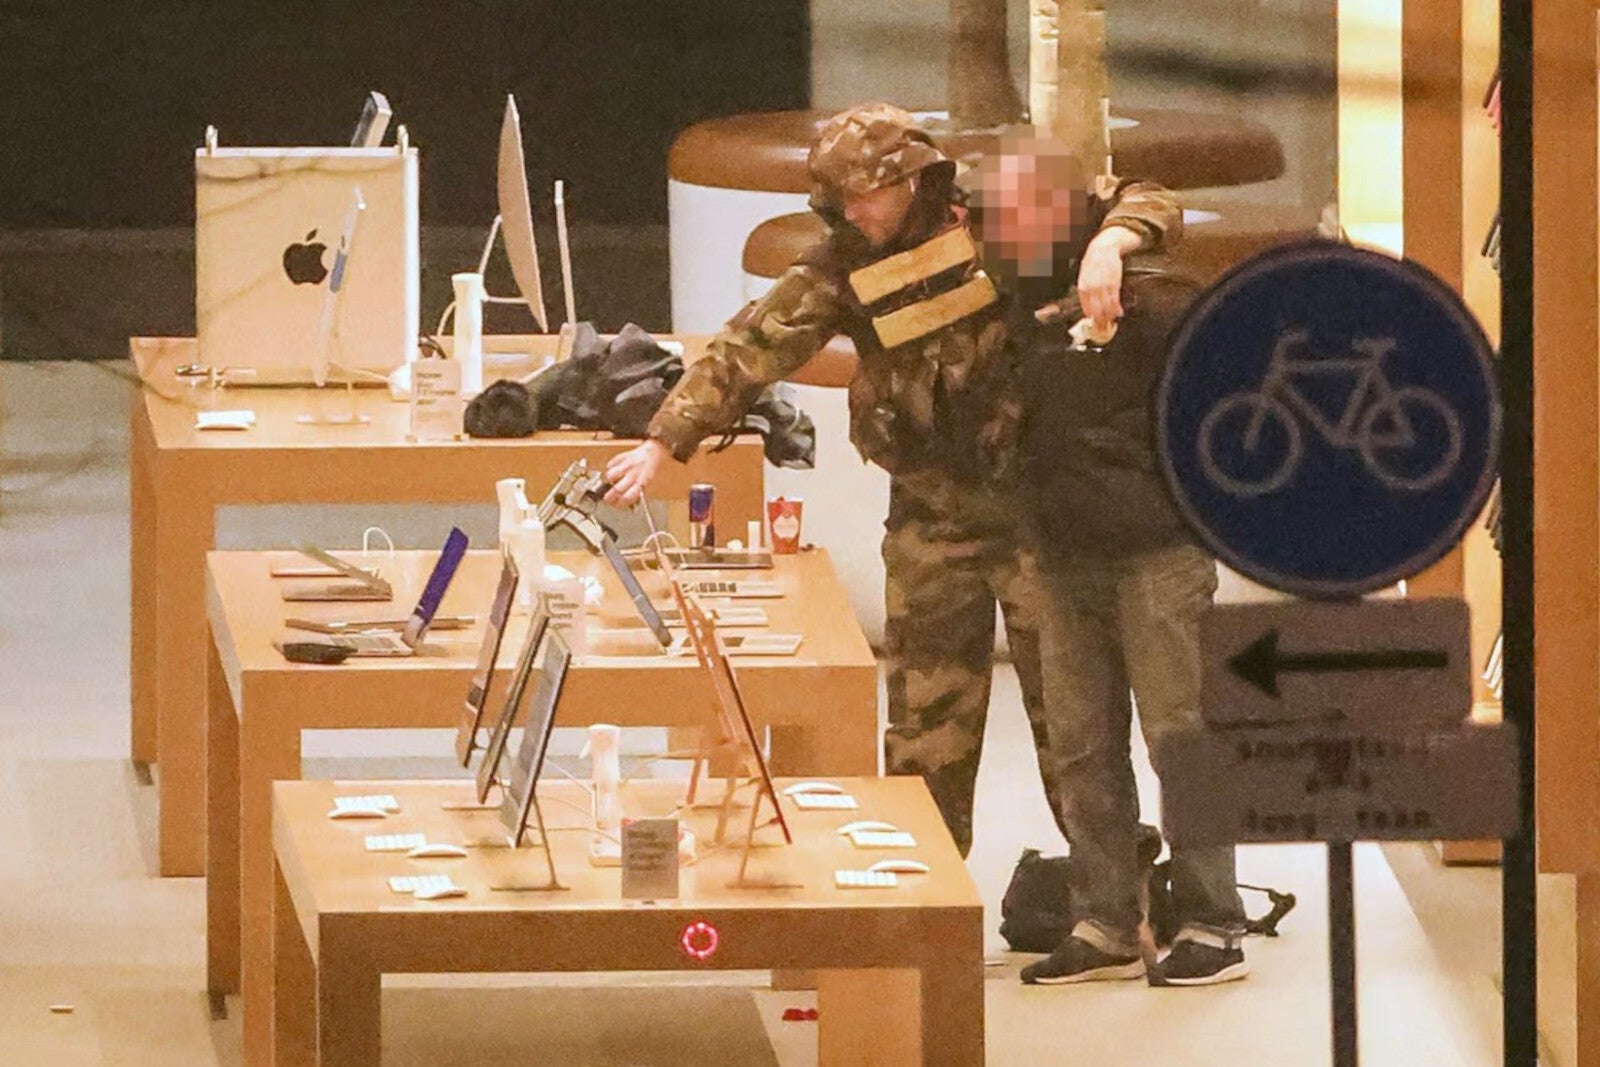 Armed robbery at an Apple store in Amsterdam - Amsterdam Apple Store becomes scene of violent armed robbery